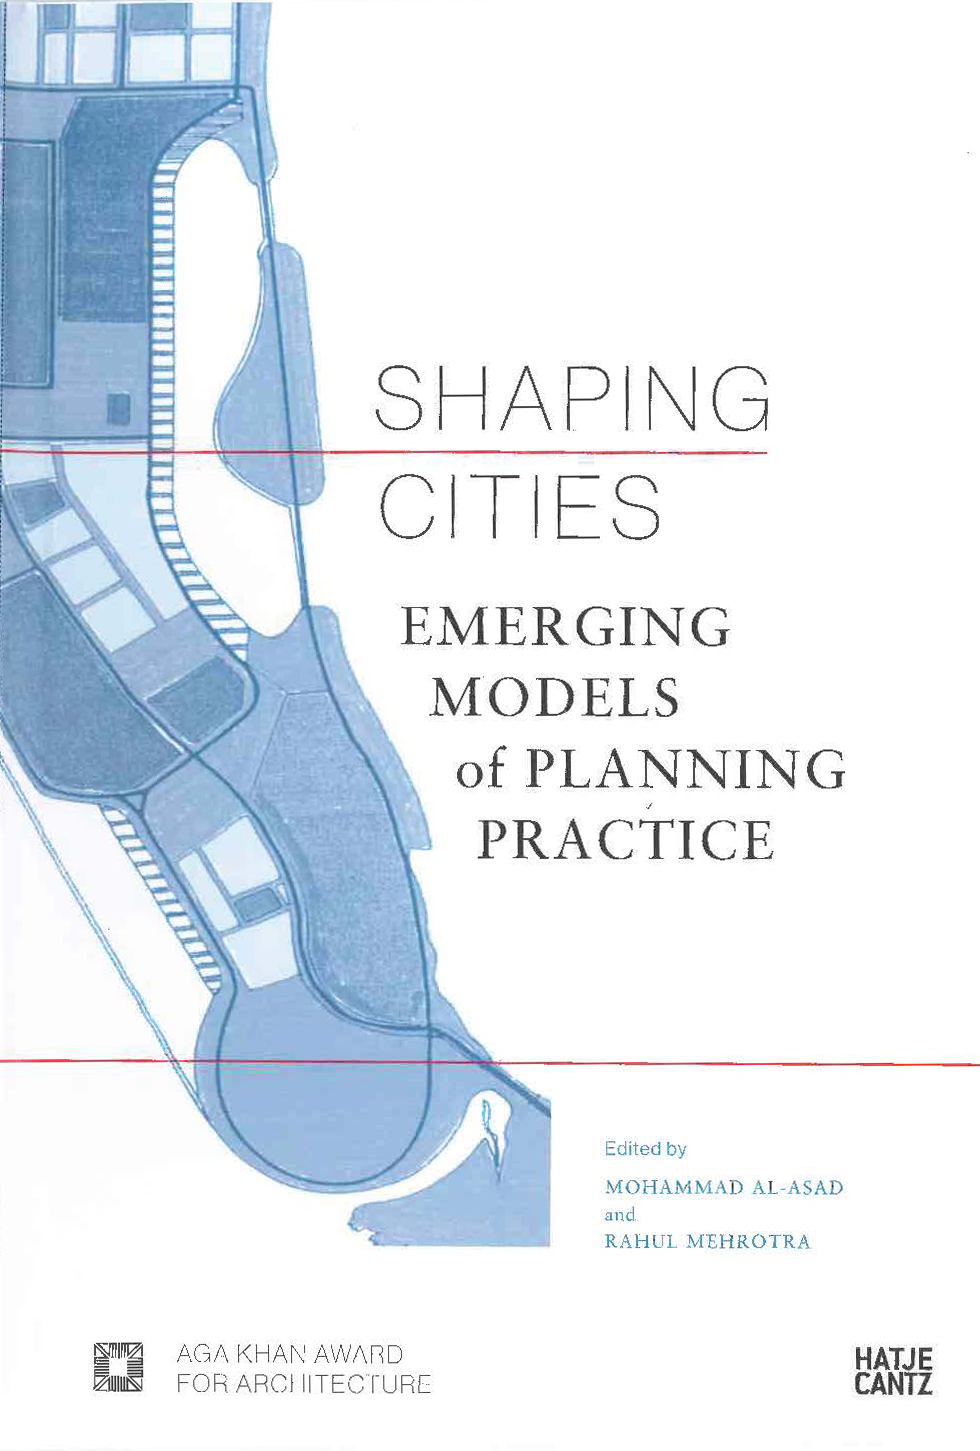 Shaping Cities. Emerging Models of Planning Practice